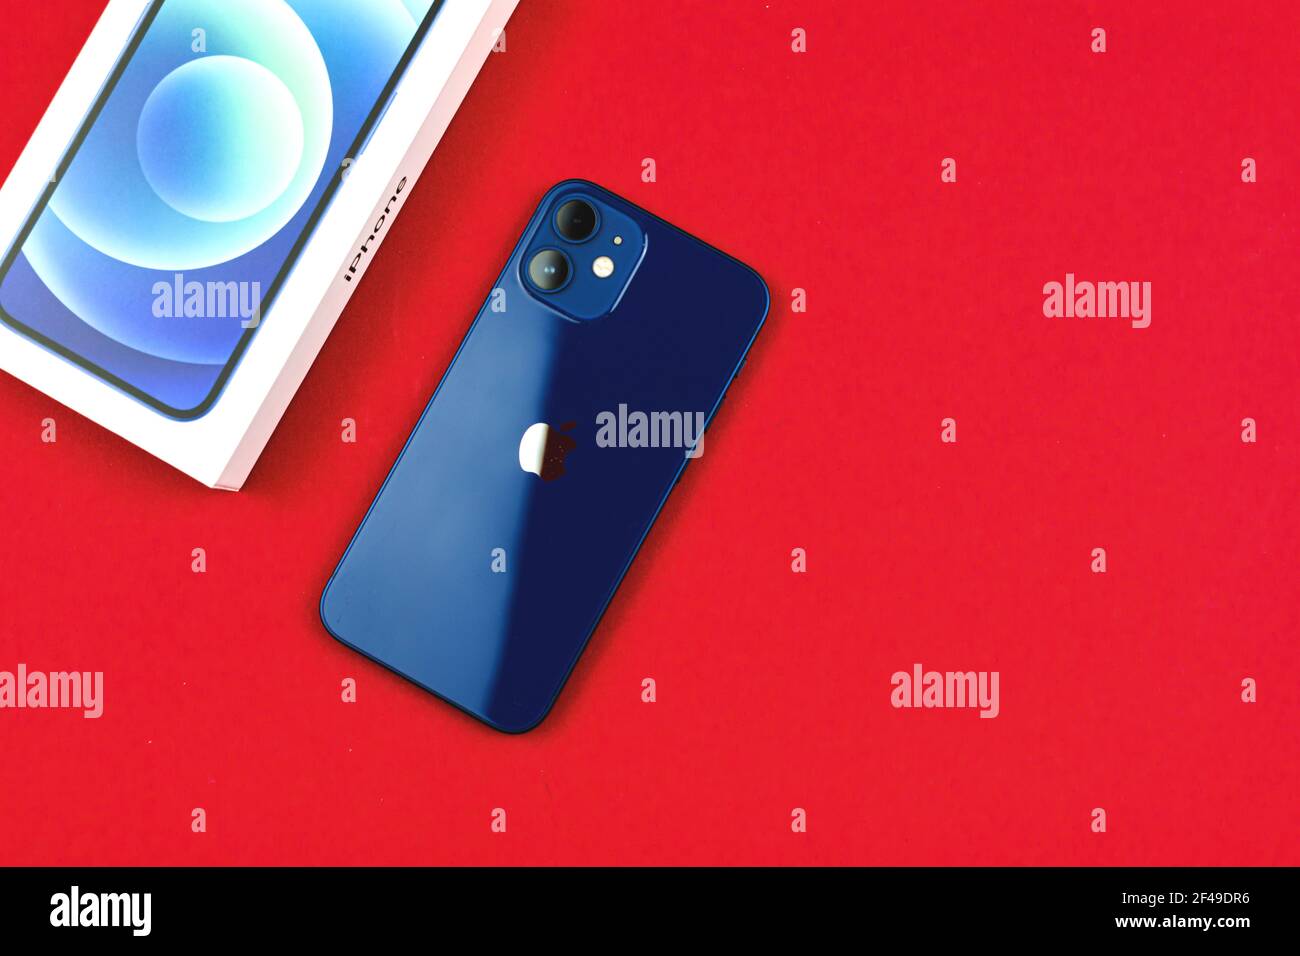 Kharkov, Ukraine - March 12, 2021: Backside of iPhone 12 Paciffic Blue color on red table or background Stock Photo